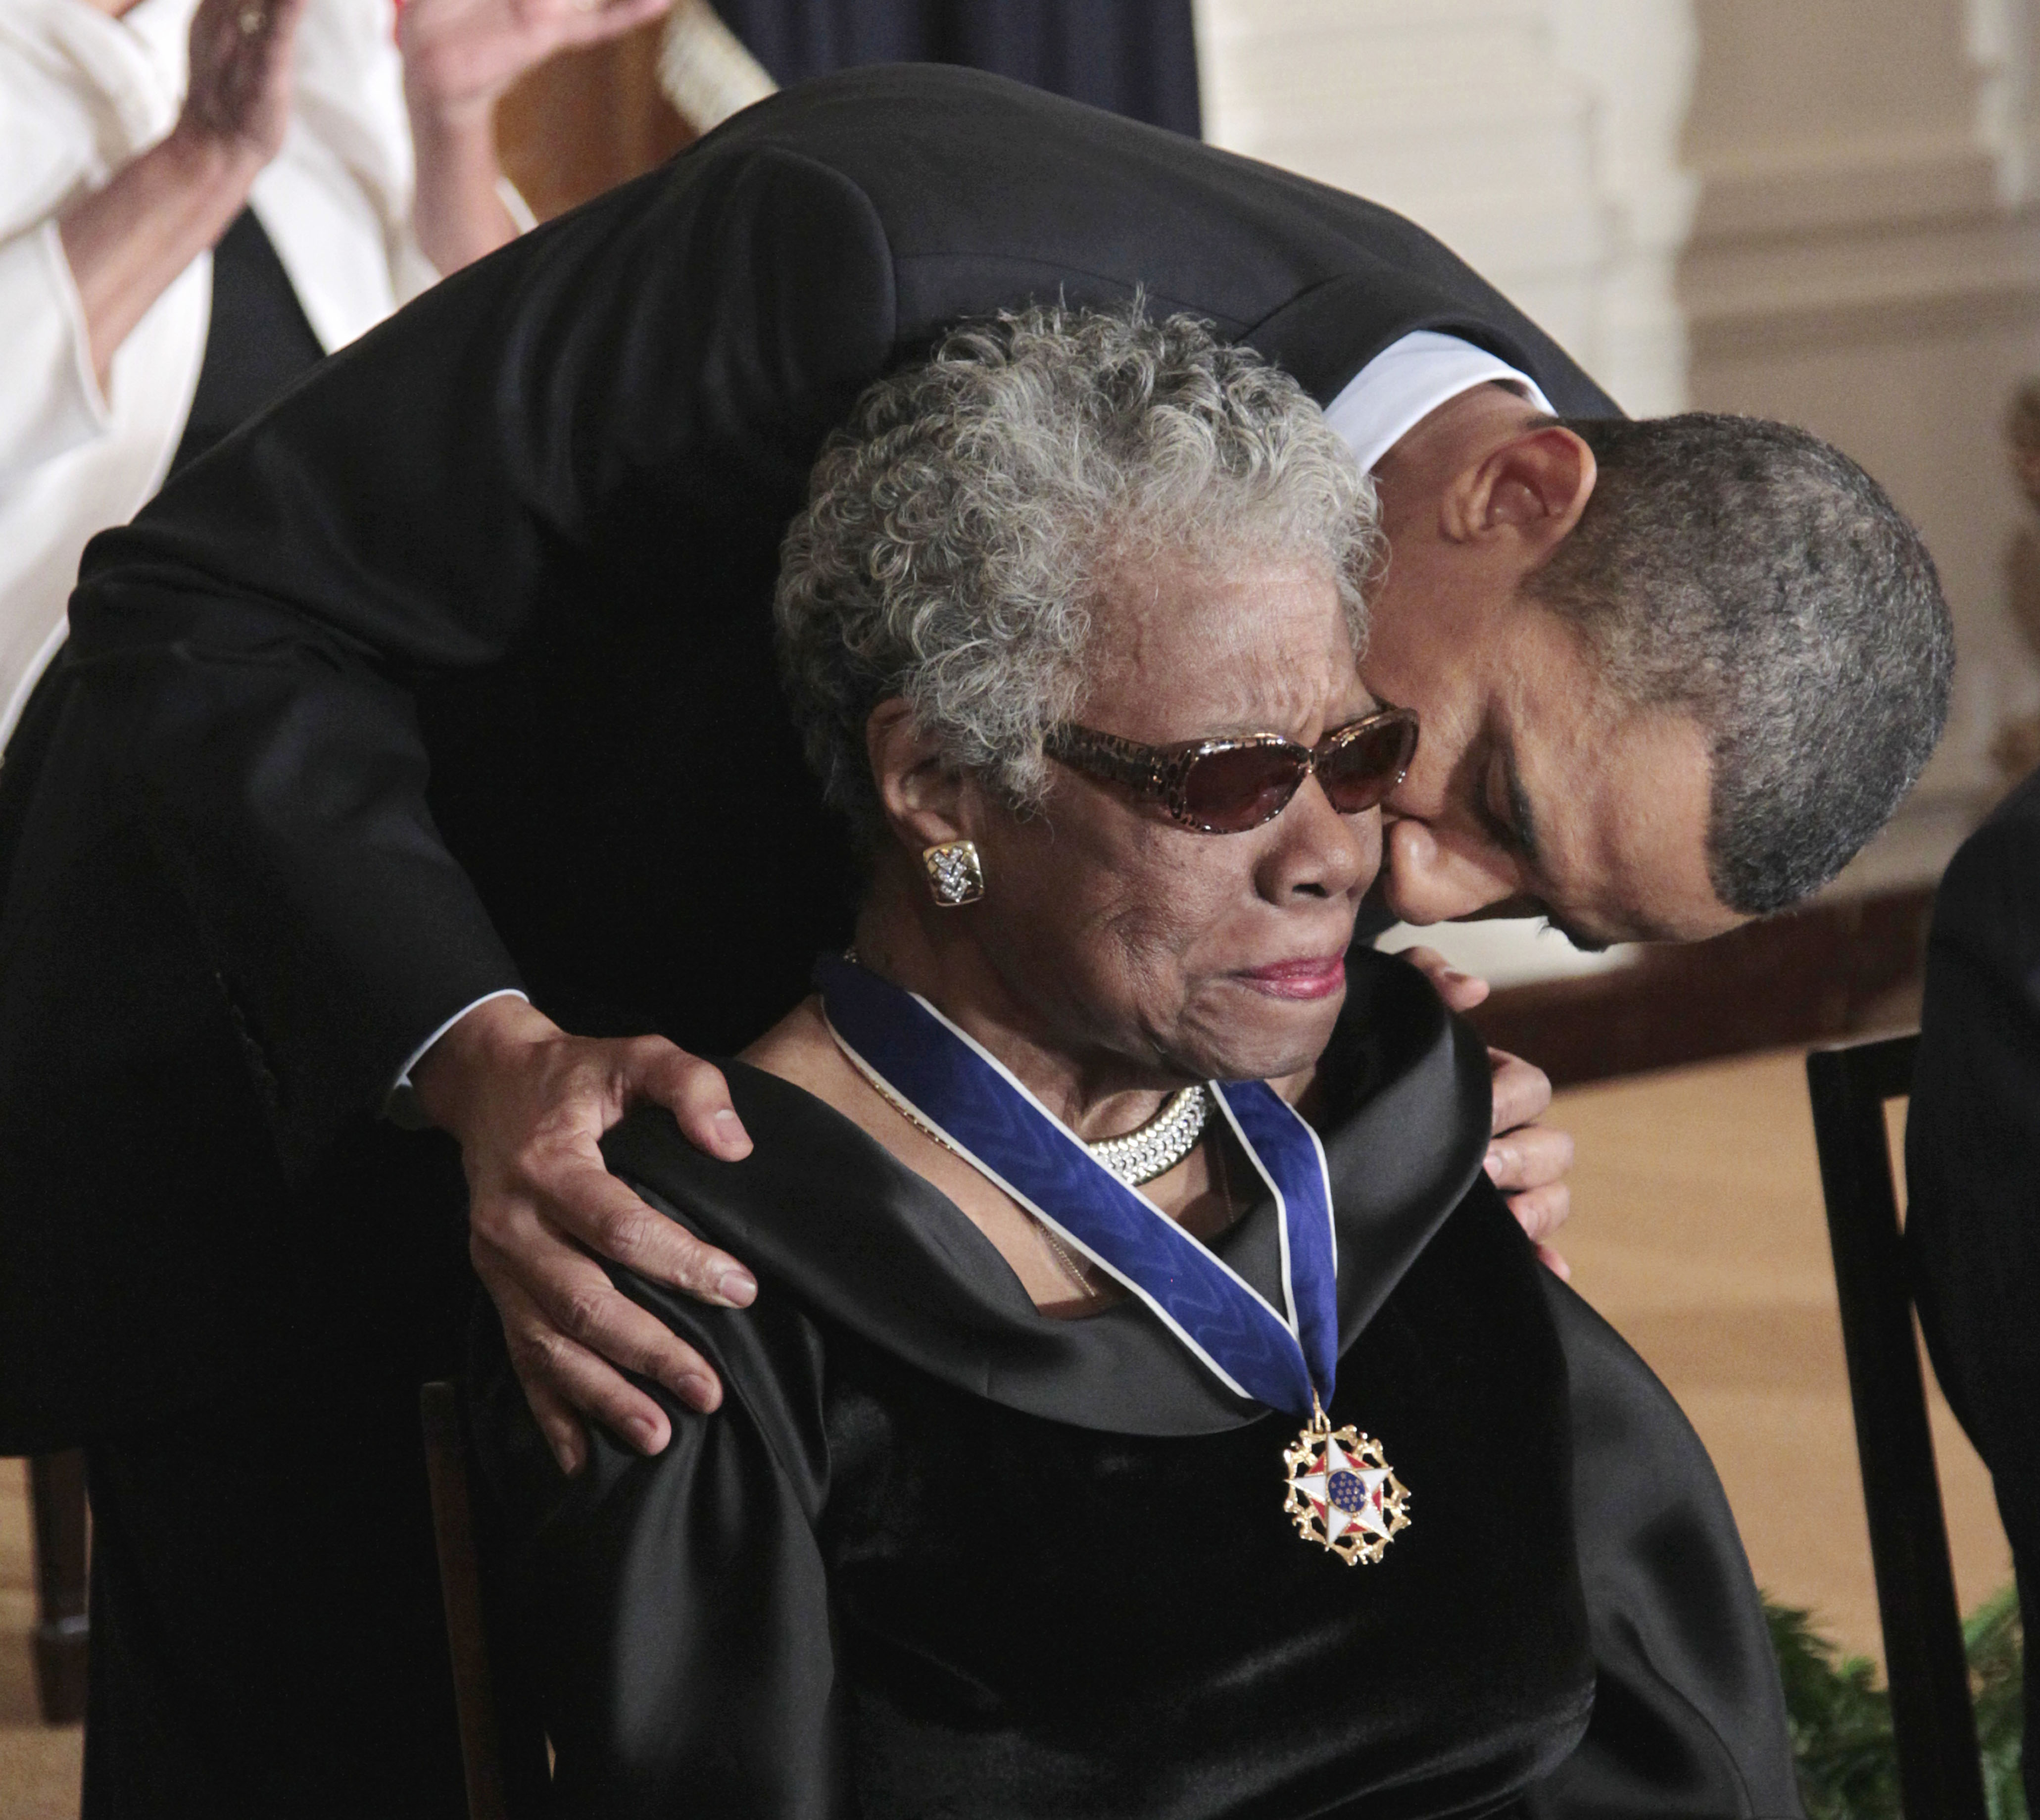 President Barack Obama kisses Angelou after awarding her the 2010 Medal of Freedom, America's highest civilian honor, during a ceremony in the East Room of the White House in Washington, Tuesday, Feb. 15, 2011.